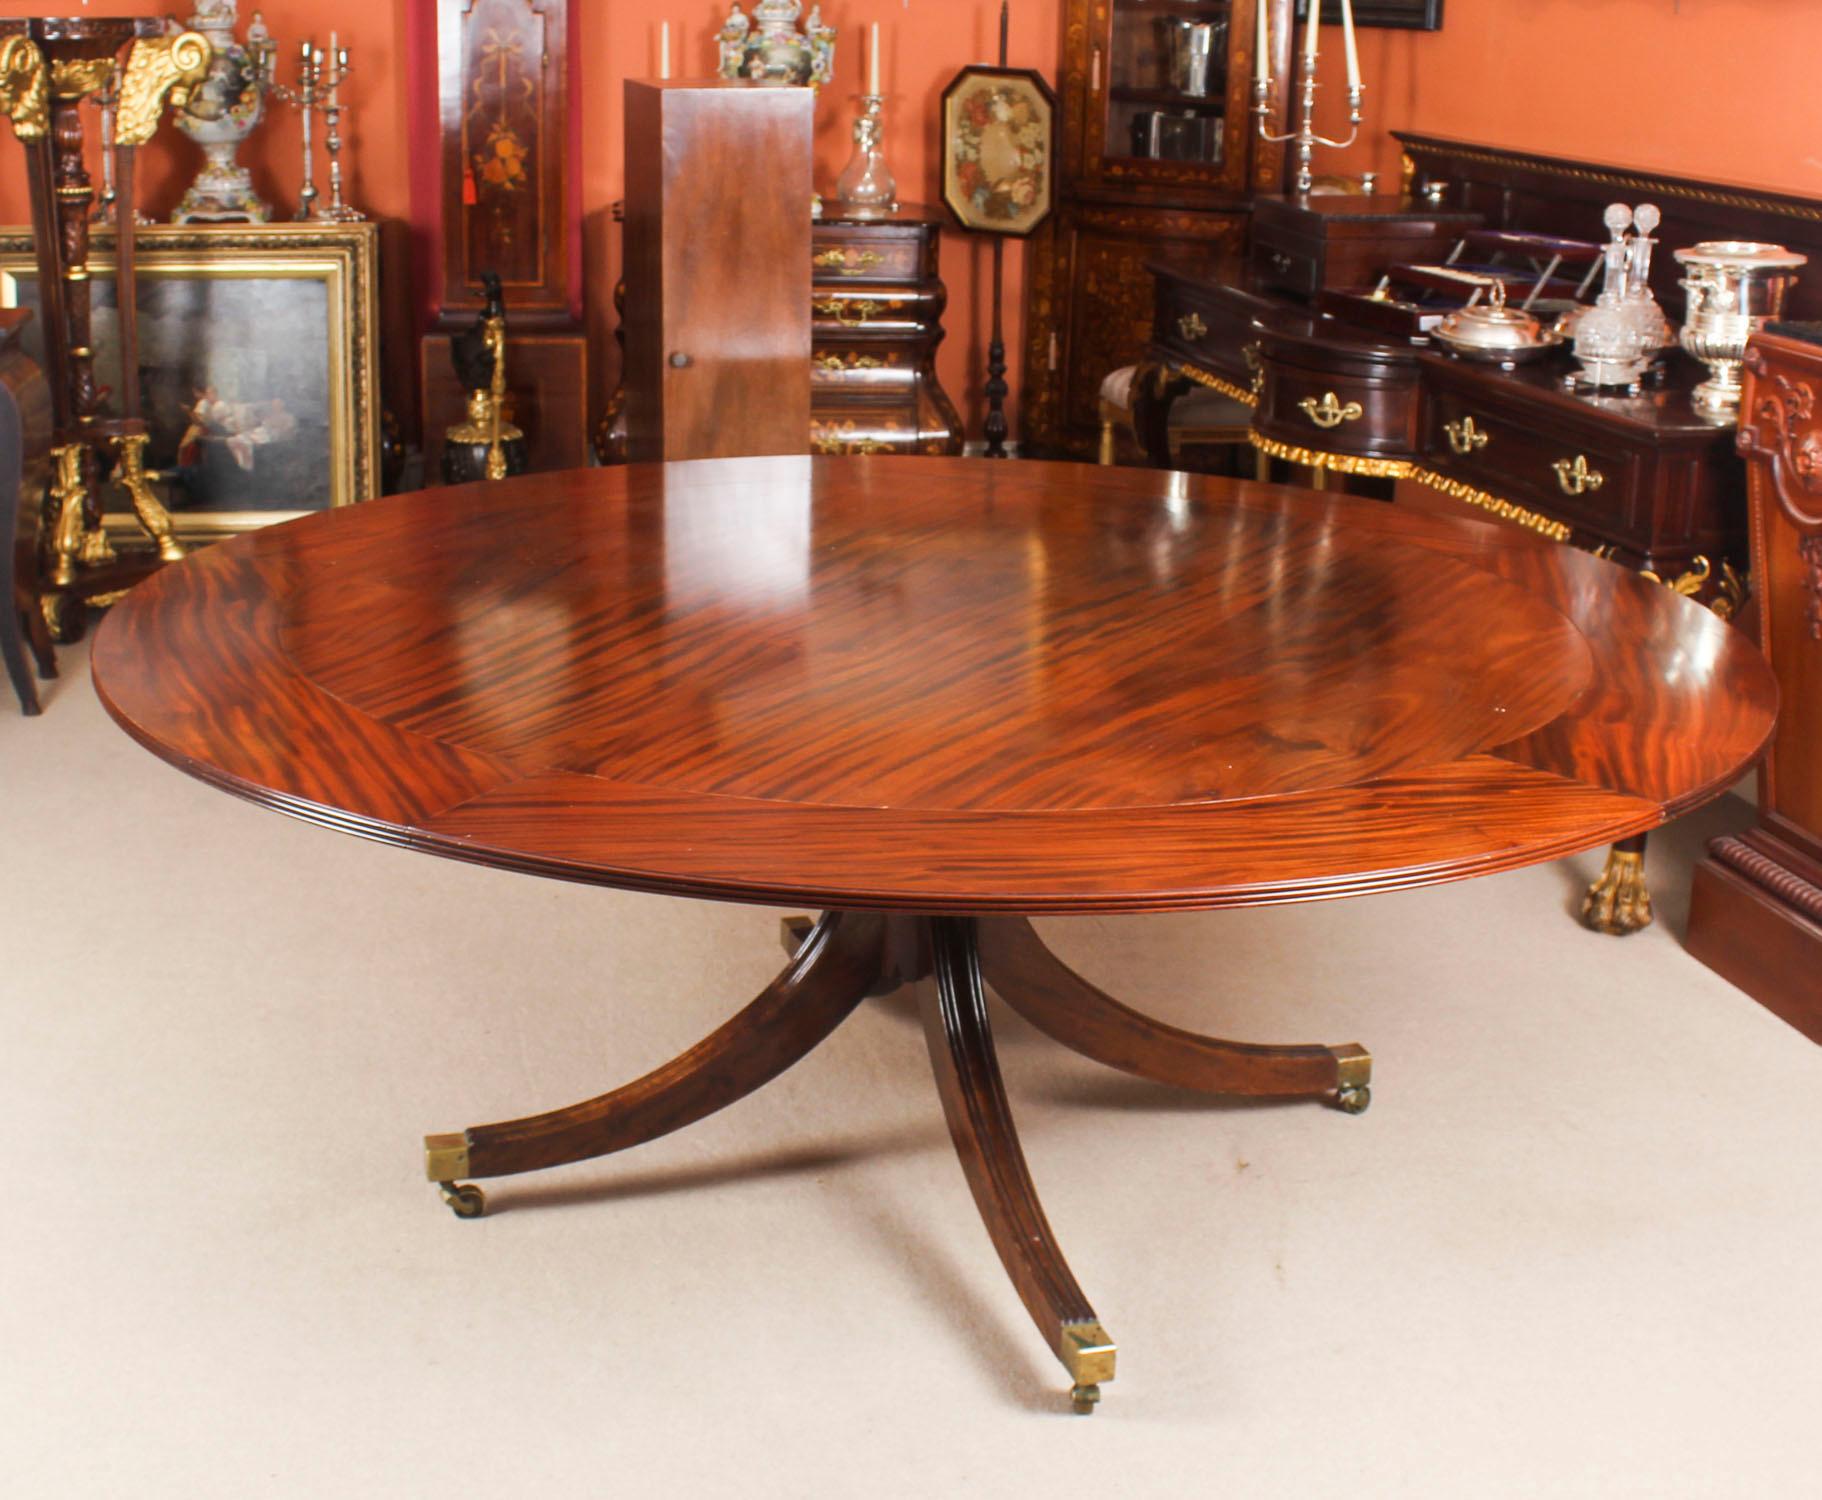 This beautiful dining set comprises a Regency Revival Jupe style dining table mid 20th Century in date, with the matching set of eight bespoke Regency style dining chairs.

The table has a solid mahogany top with a reeded edge that has five